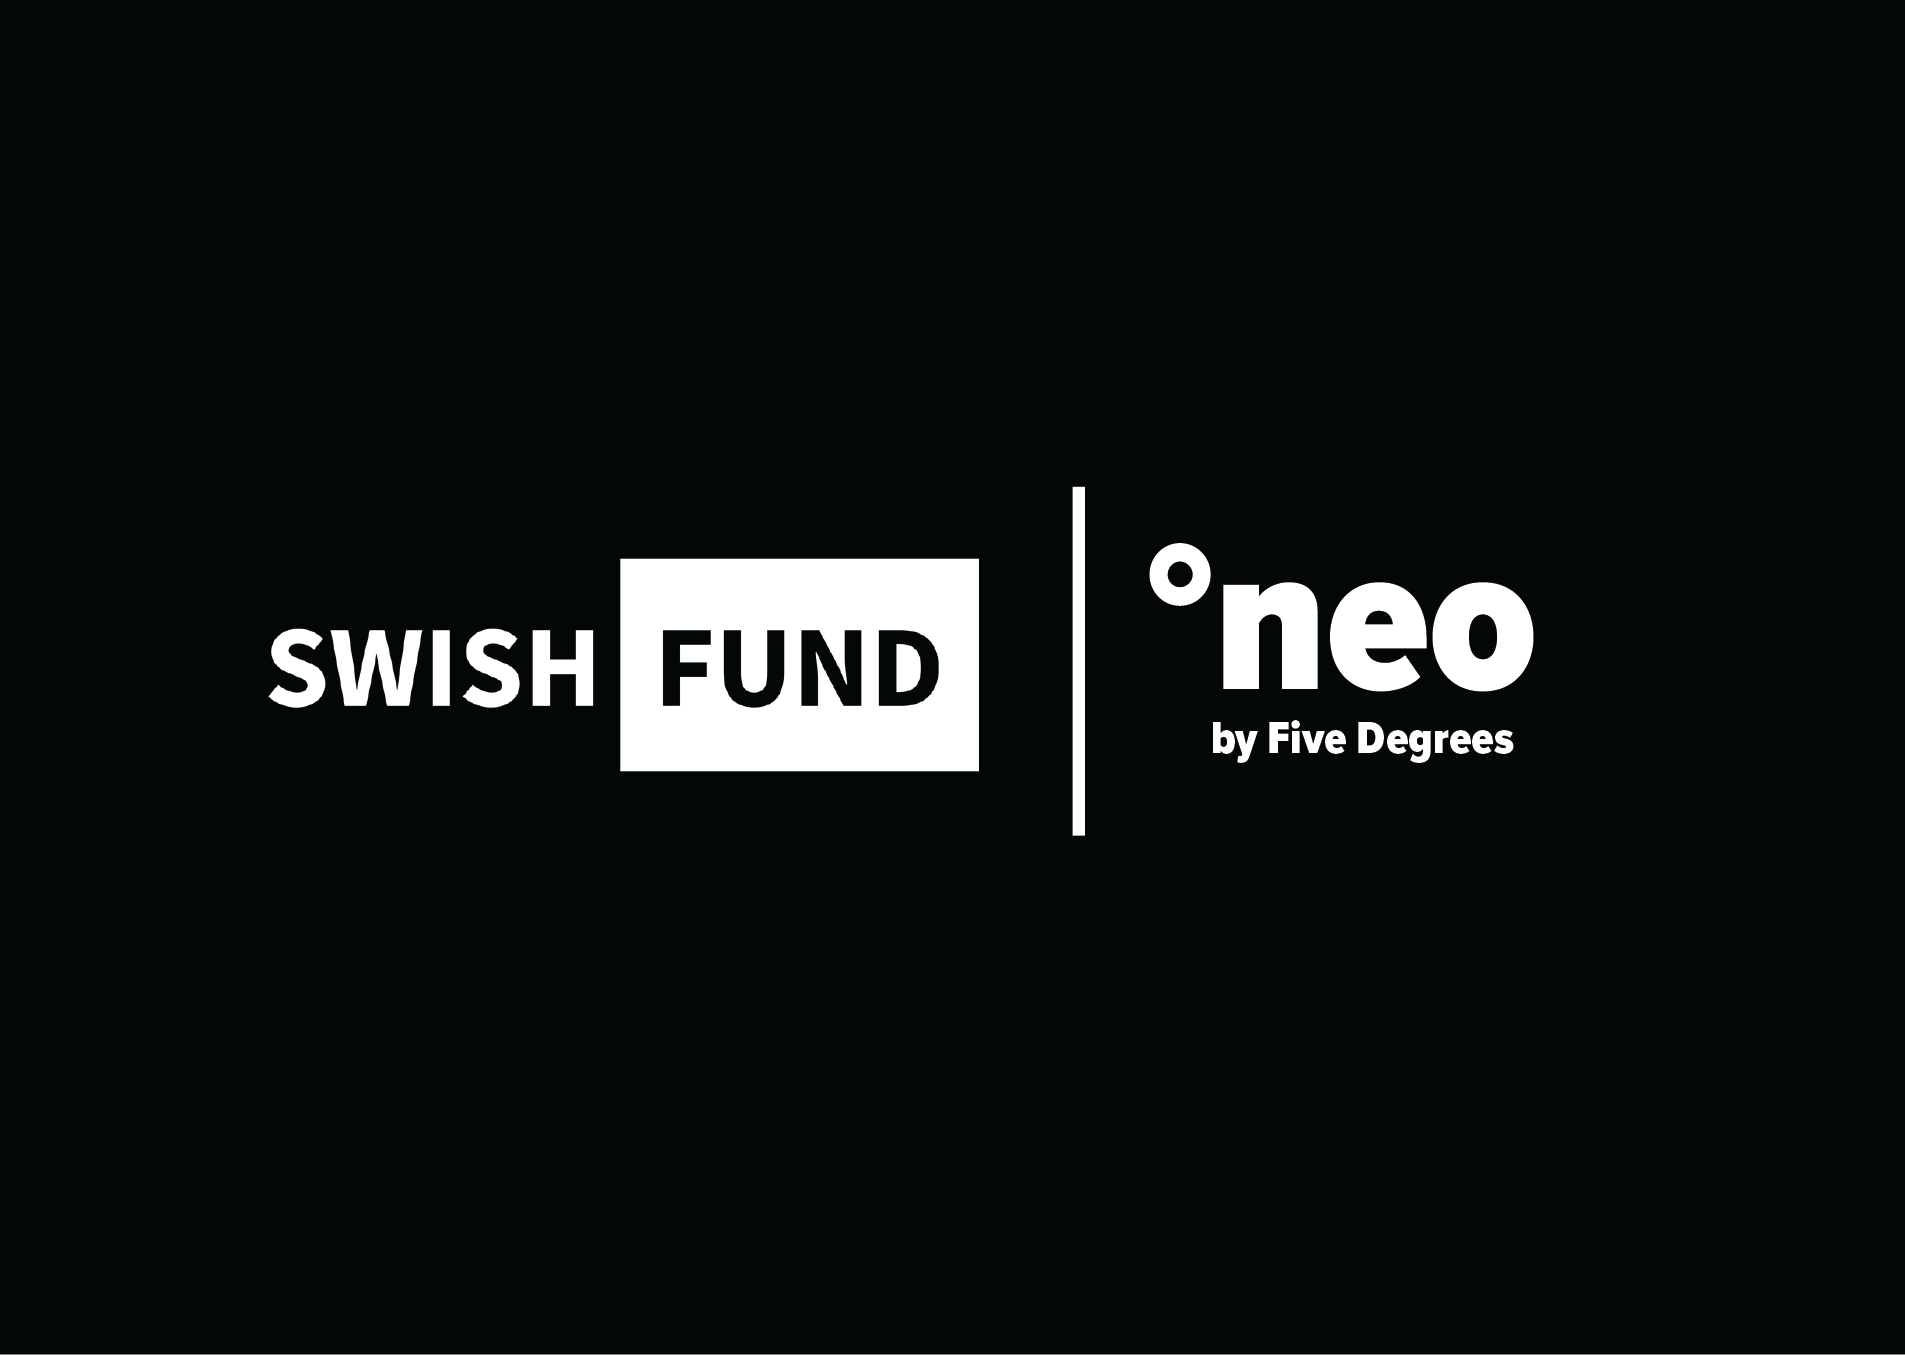 Swishfund goes live with the cloud-native core banking platform °neo